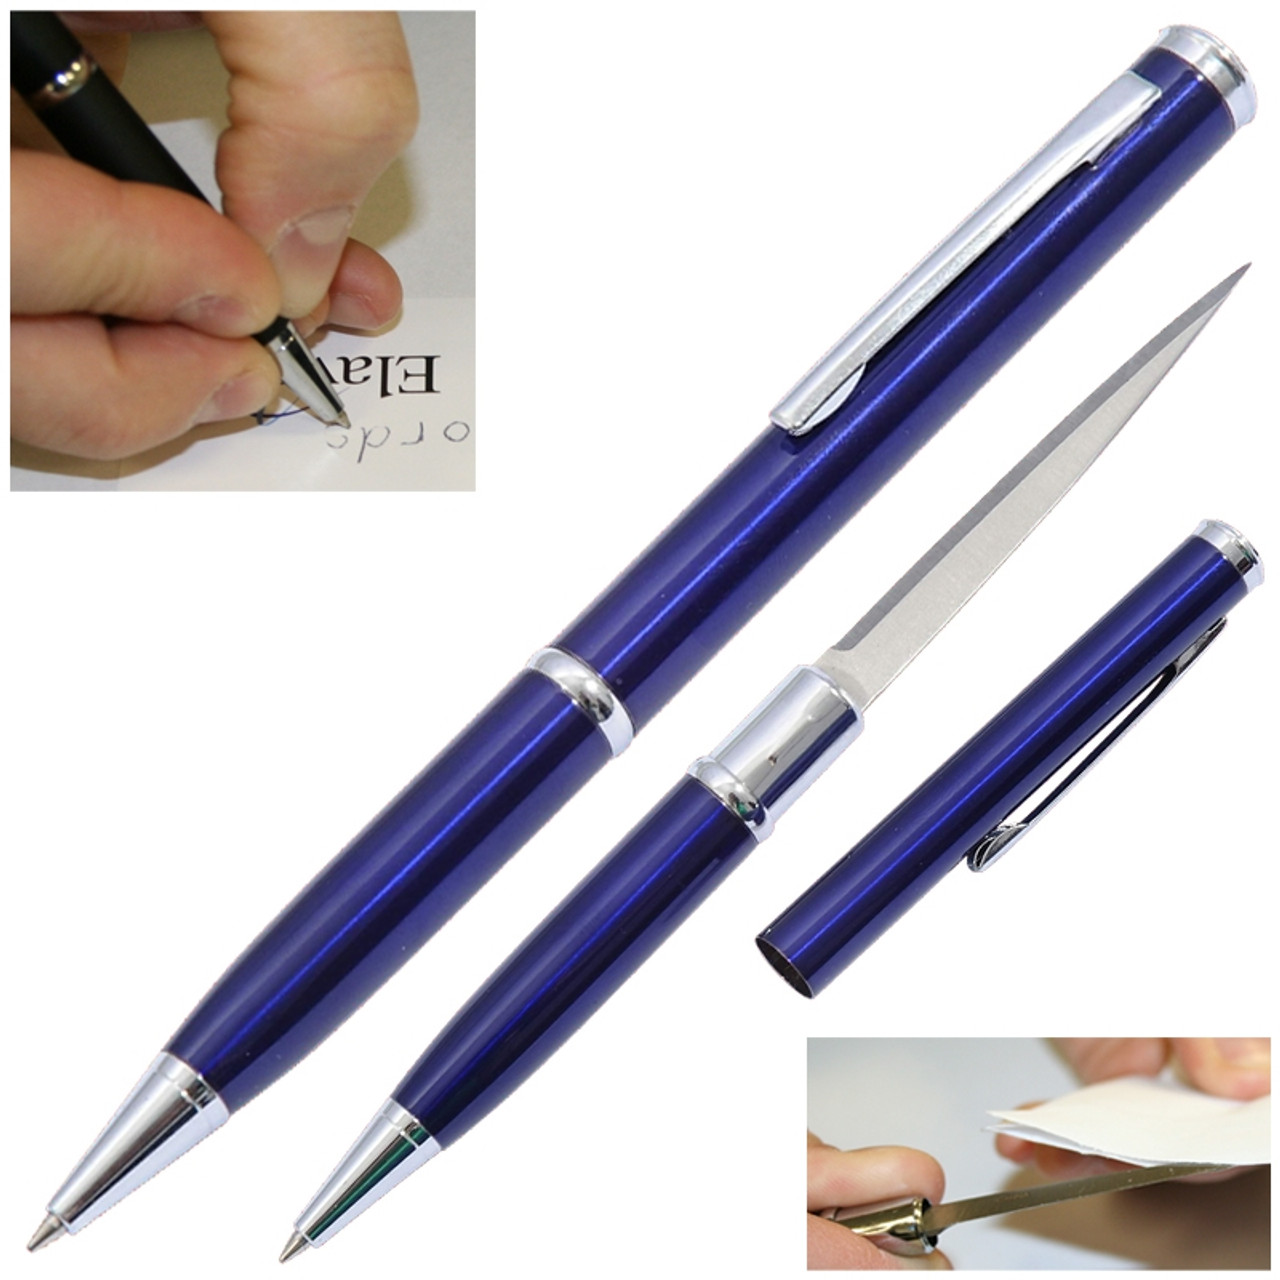 Letter Knife Supplies., Pens Opens Letters, Gifts Accessories